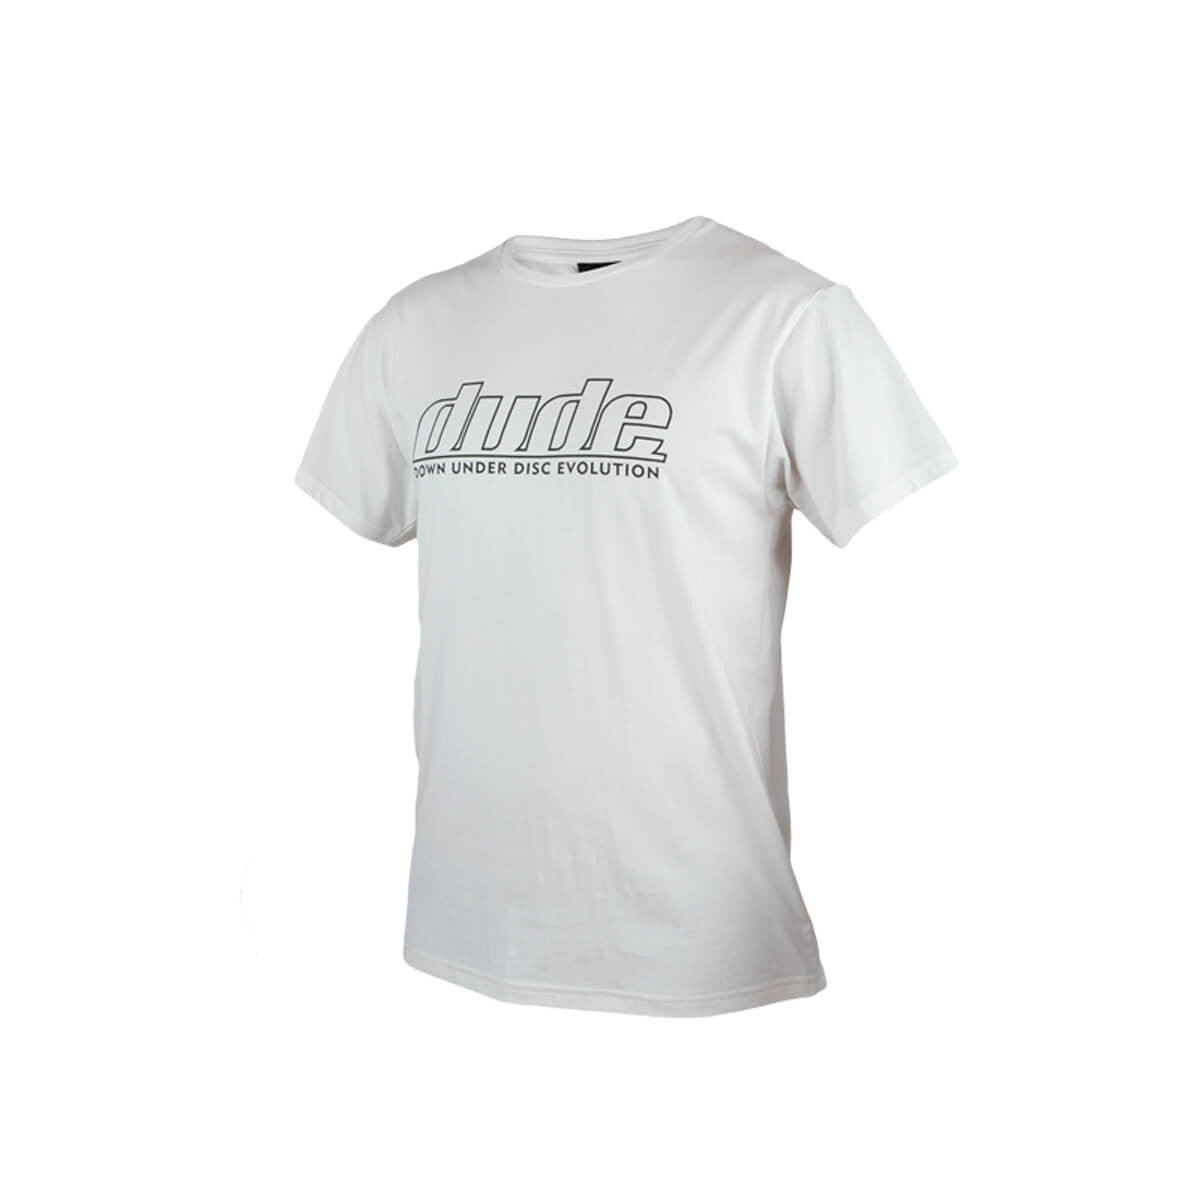  An image of Blank Corporate Tees in white color with one colour logo print and fold over labels